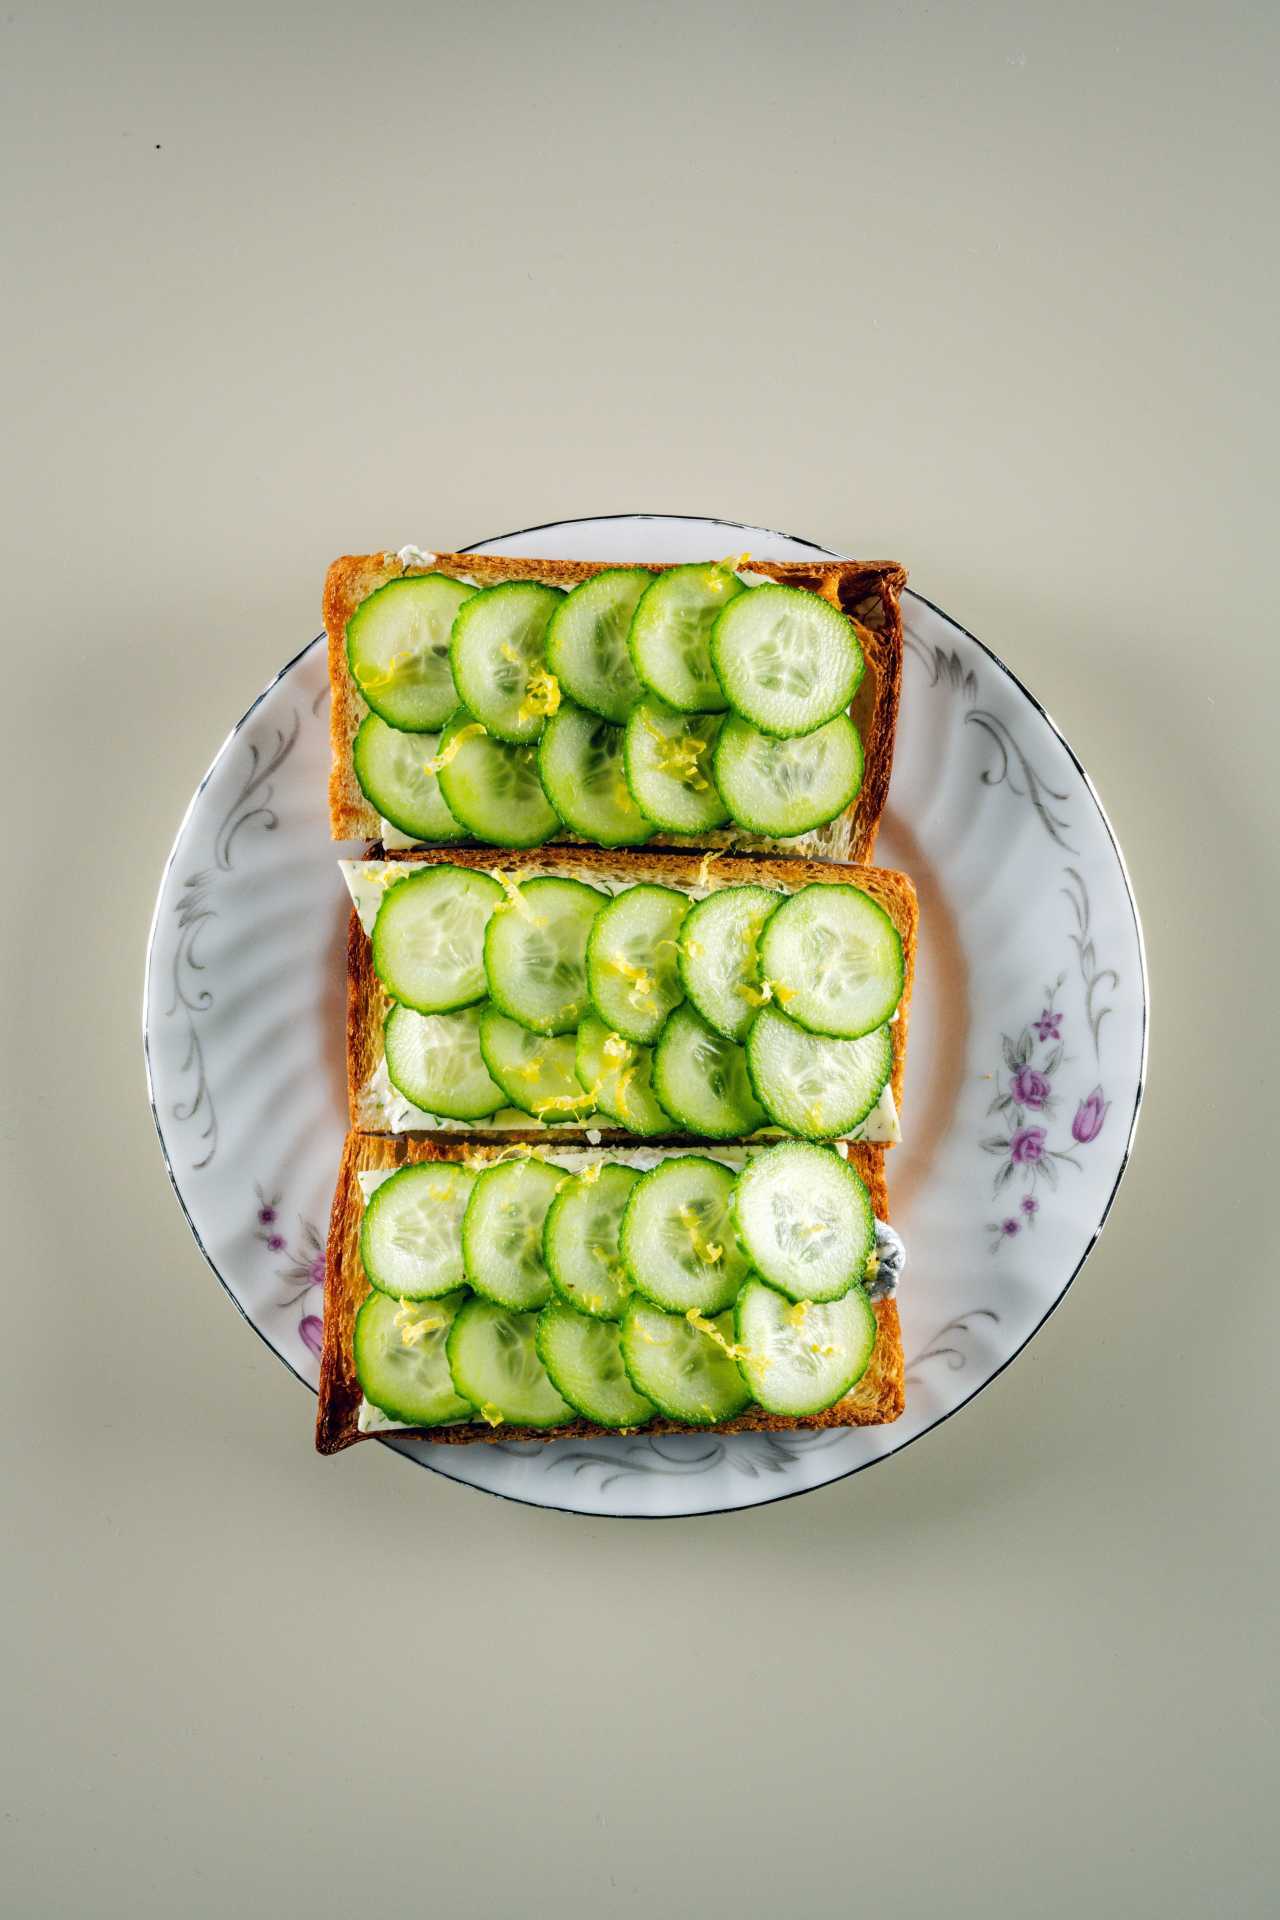 The Anchovy Toast with cucumbers at Lisbon Hotel